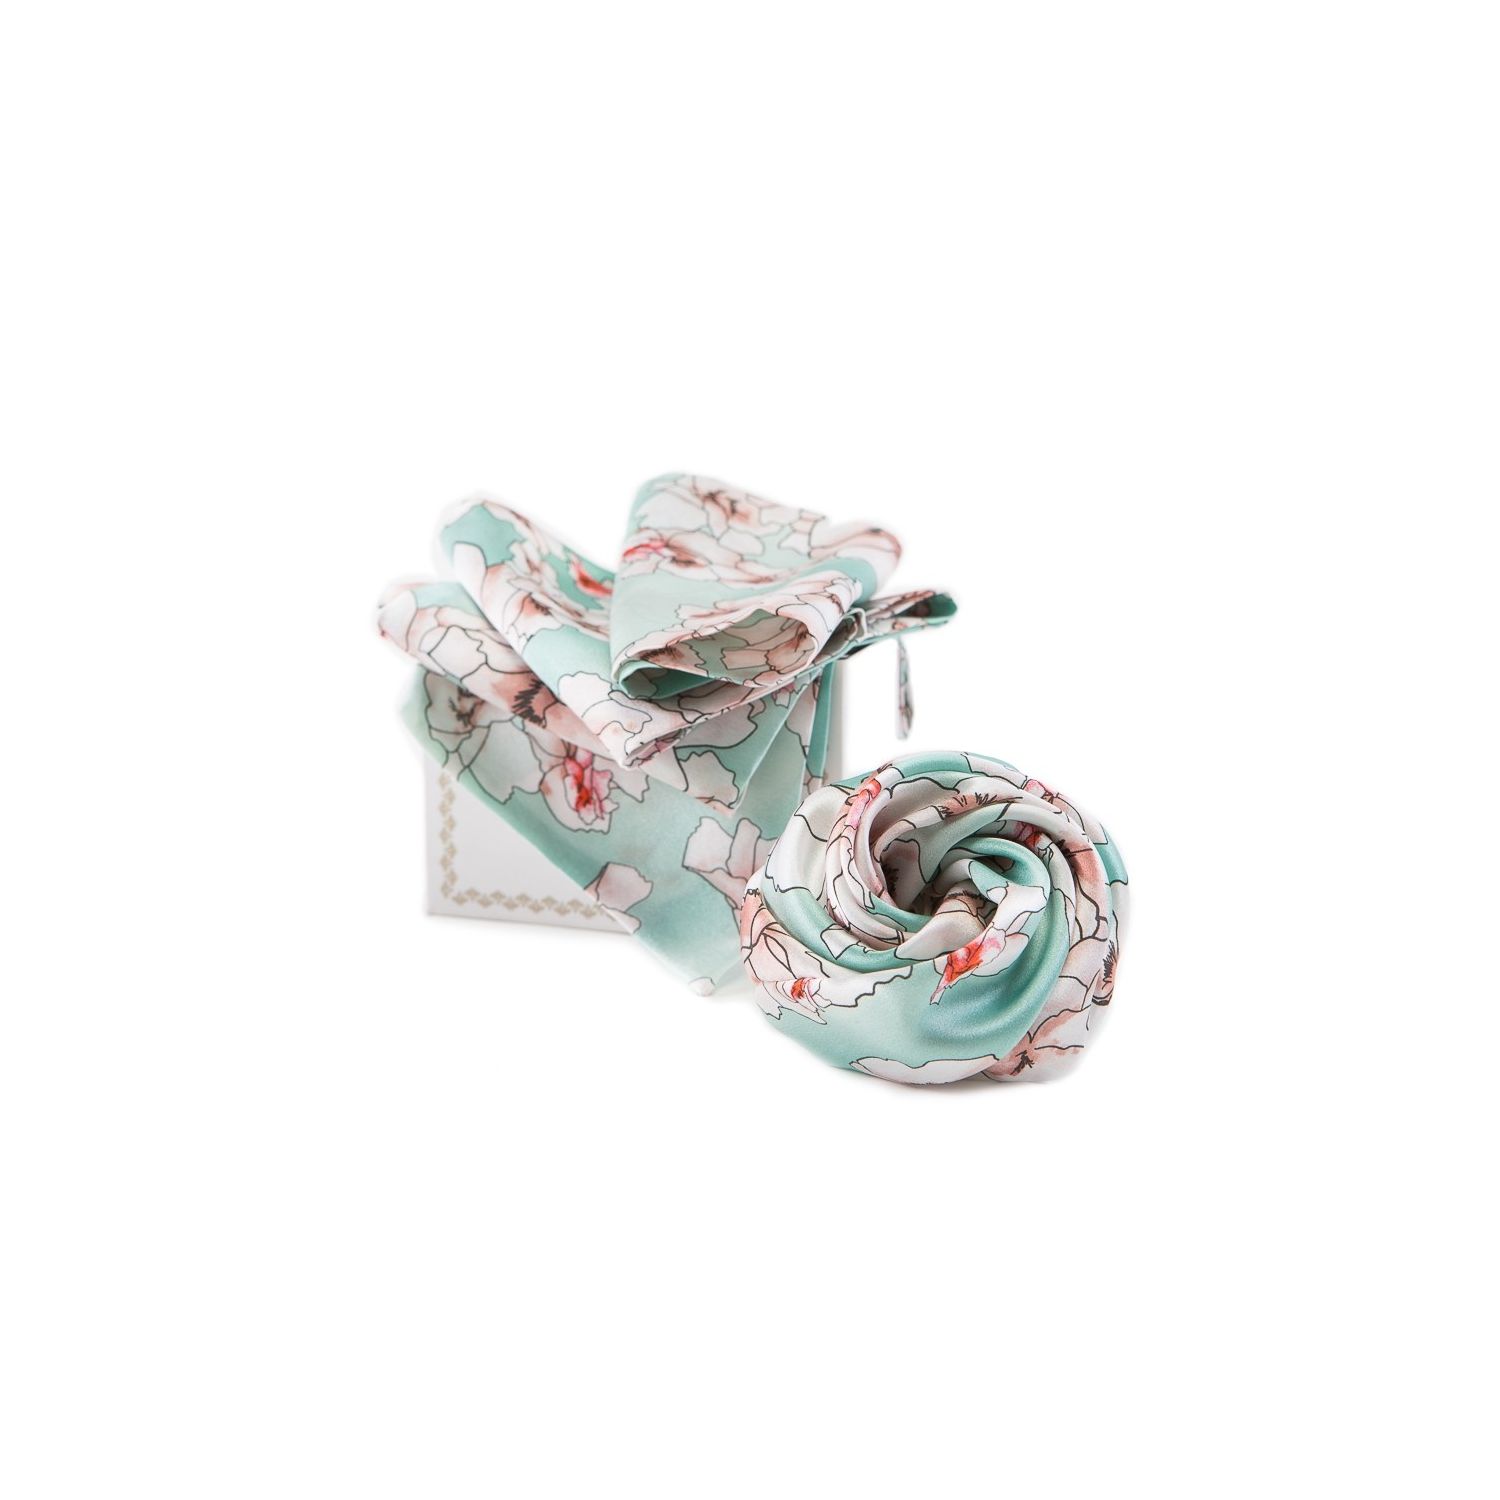 GIFT: Silk Scarf and hair rose Blue Serenity